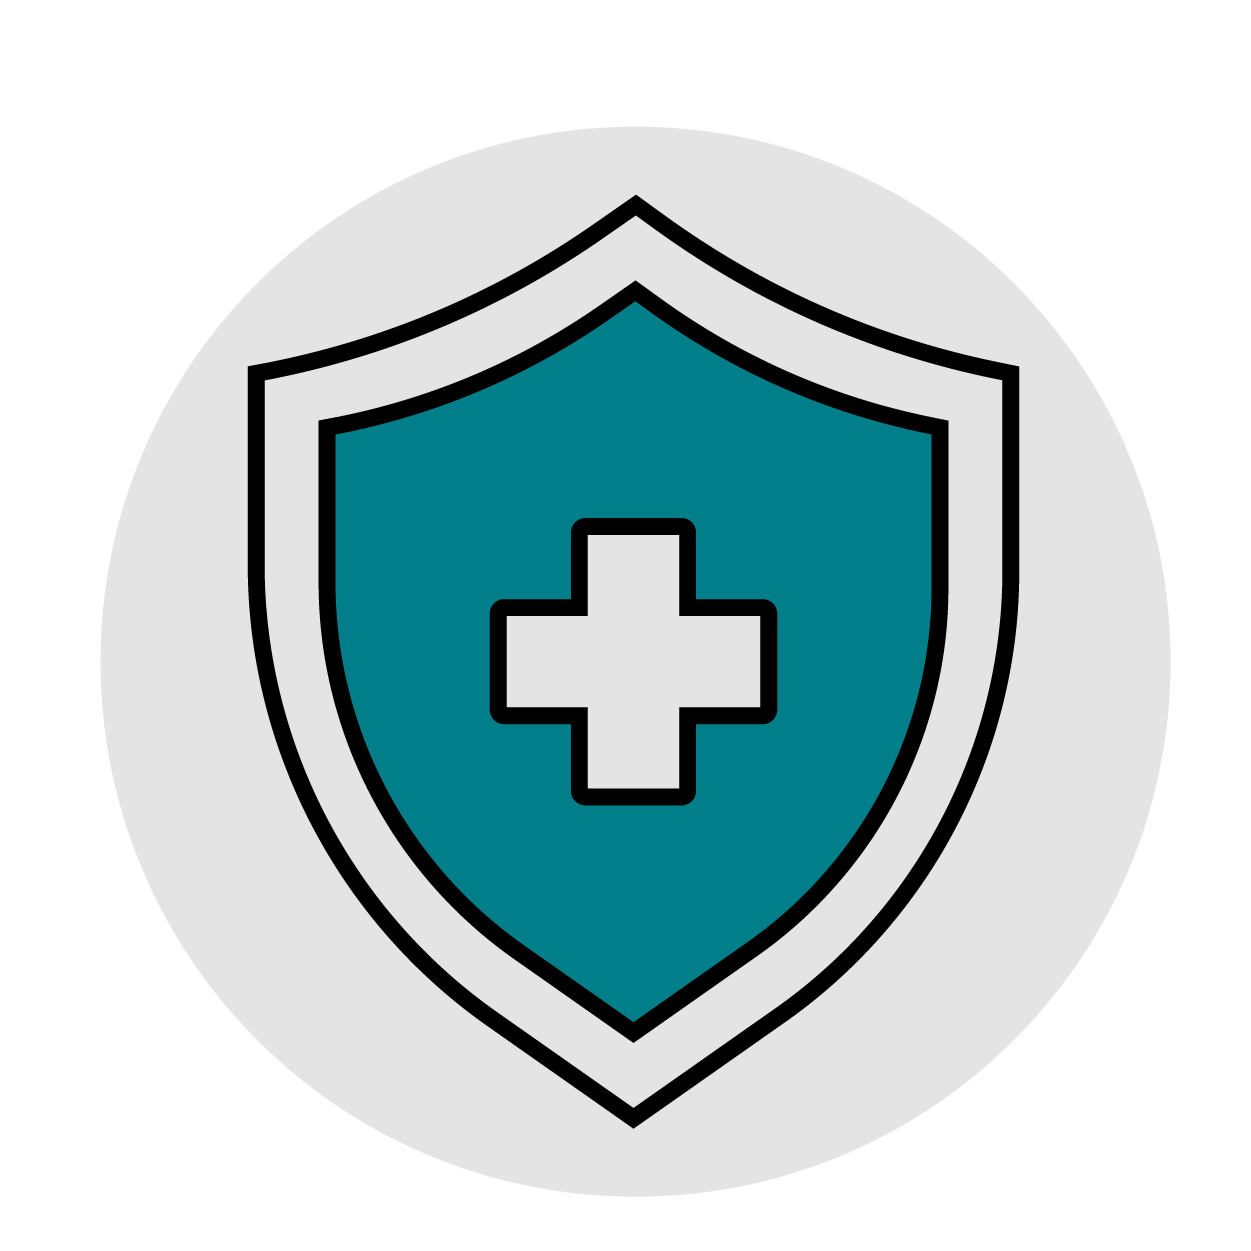 Shield with medical cross on it icon